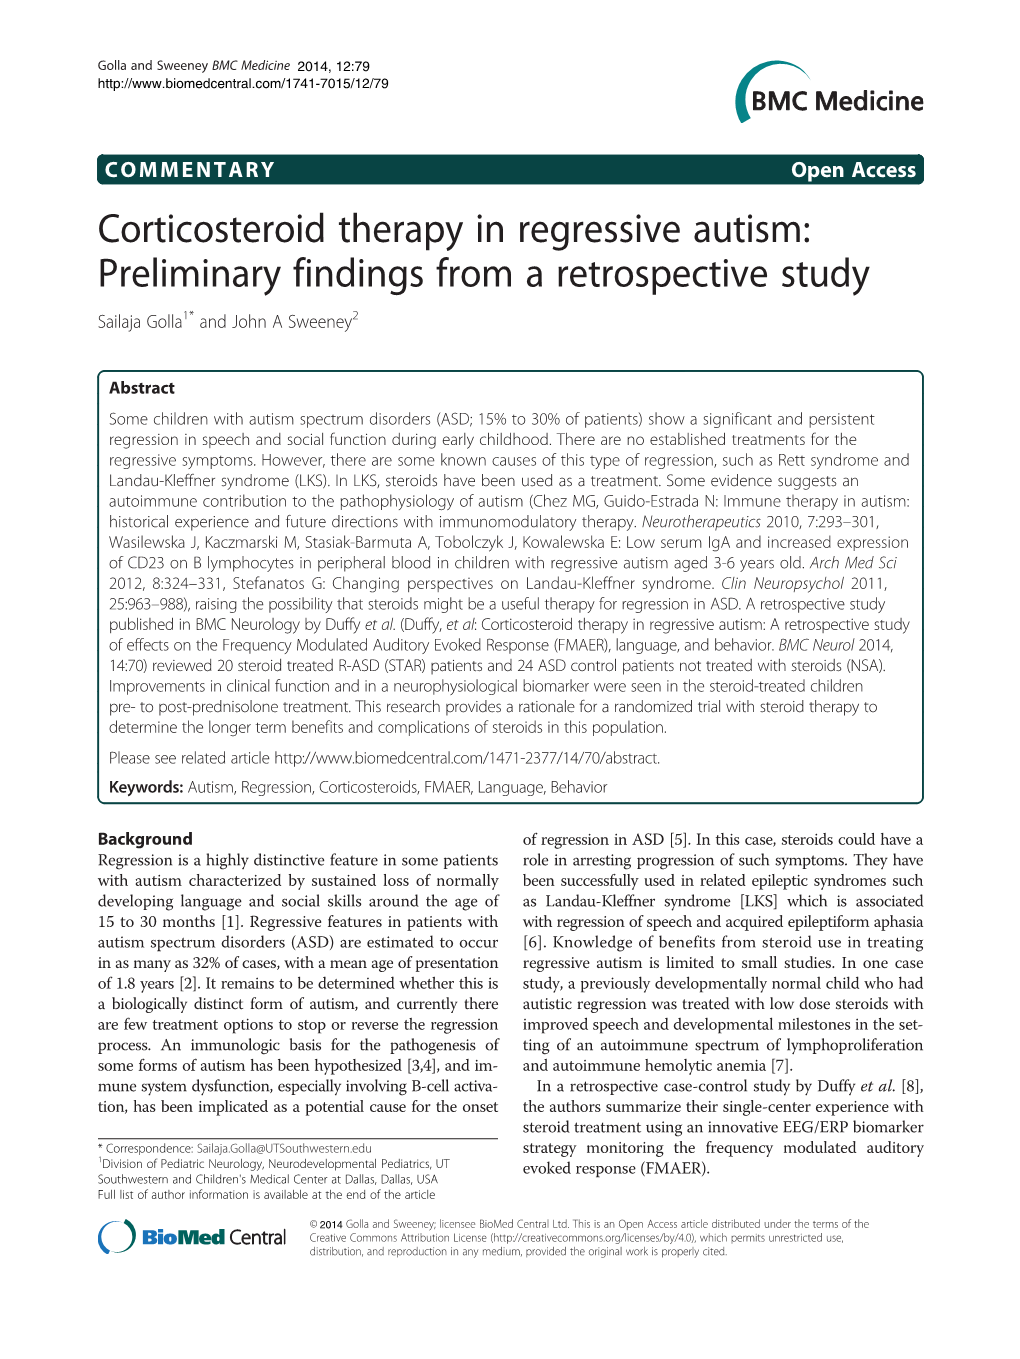 Corticosteroid Therapy in Regressive Autism: Preliminary Findings from a Retrospective Study Sailaja Golla1* and John a Sweeney2